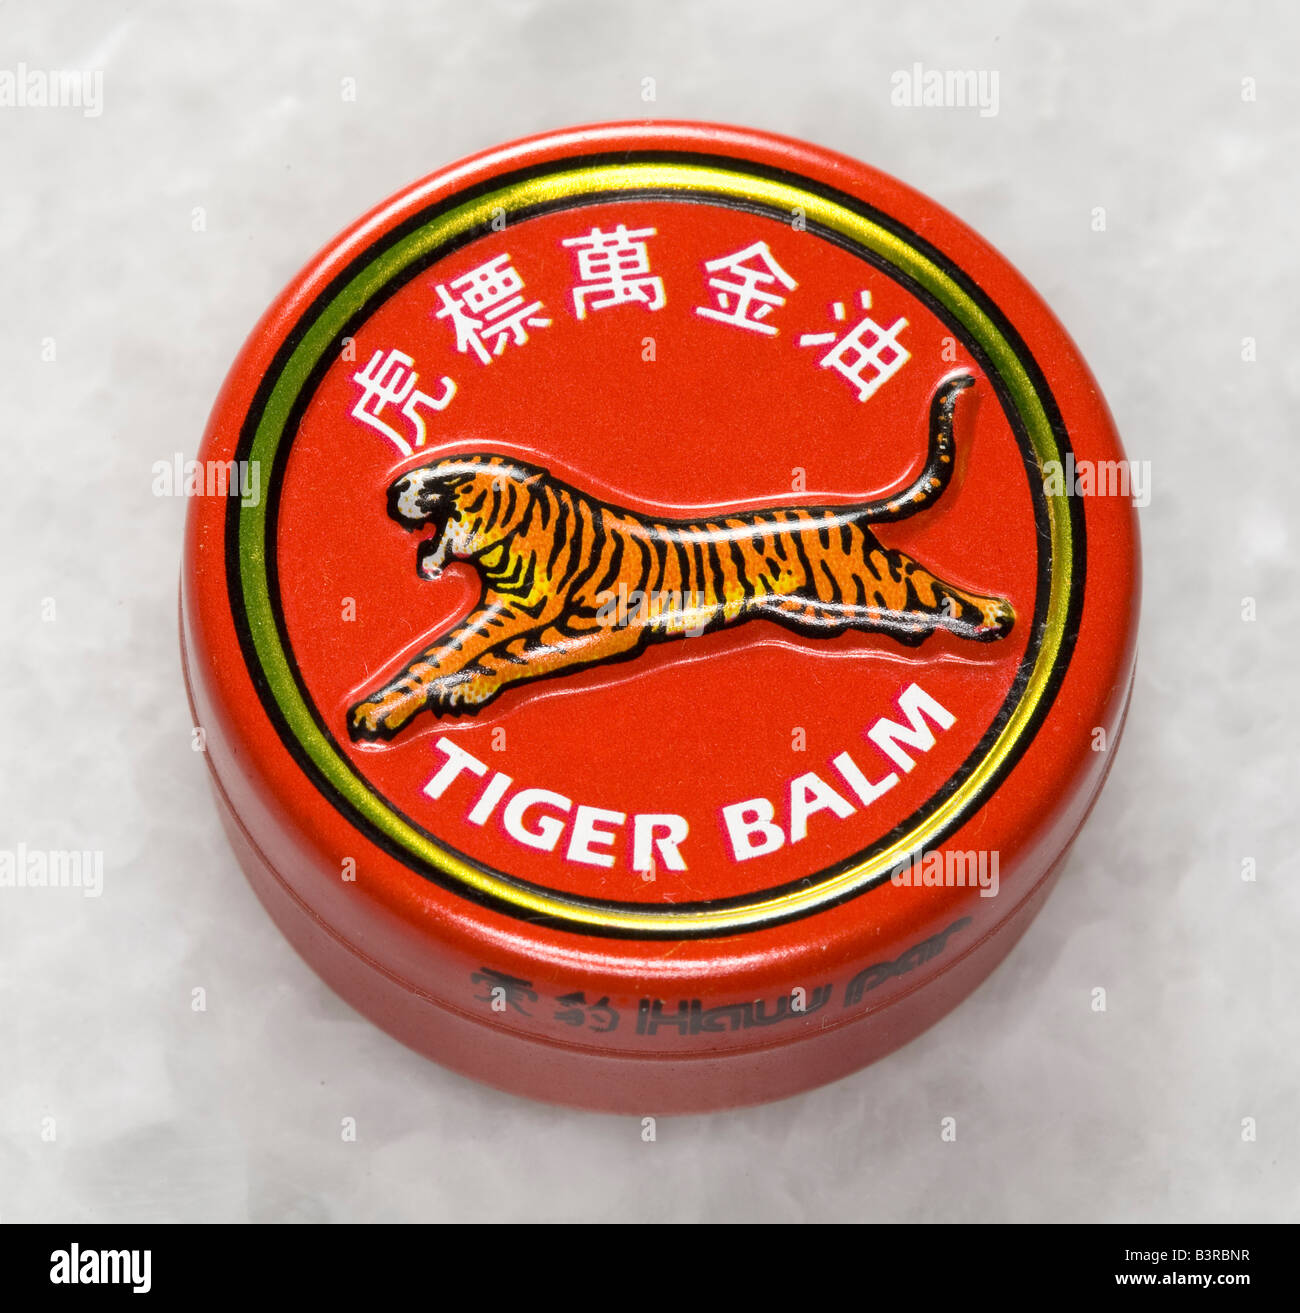 Small tin of Tiger balm famous medicinal rub for aches and pains. Stock Photo